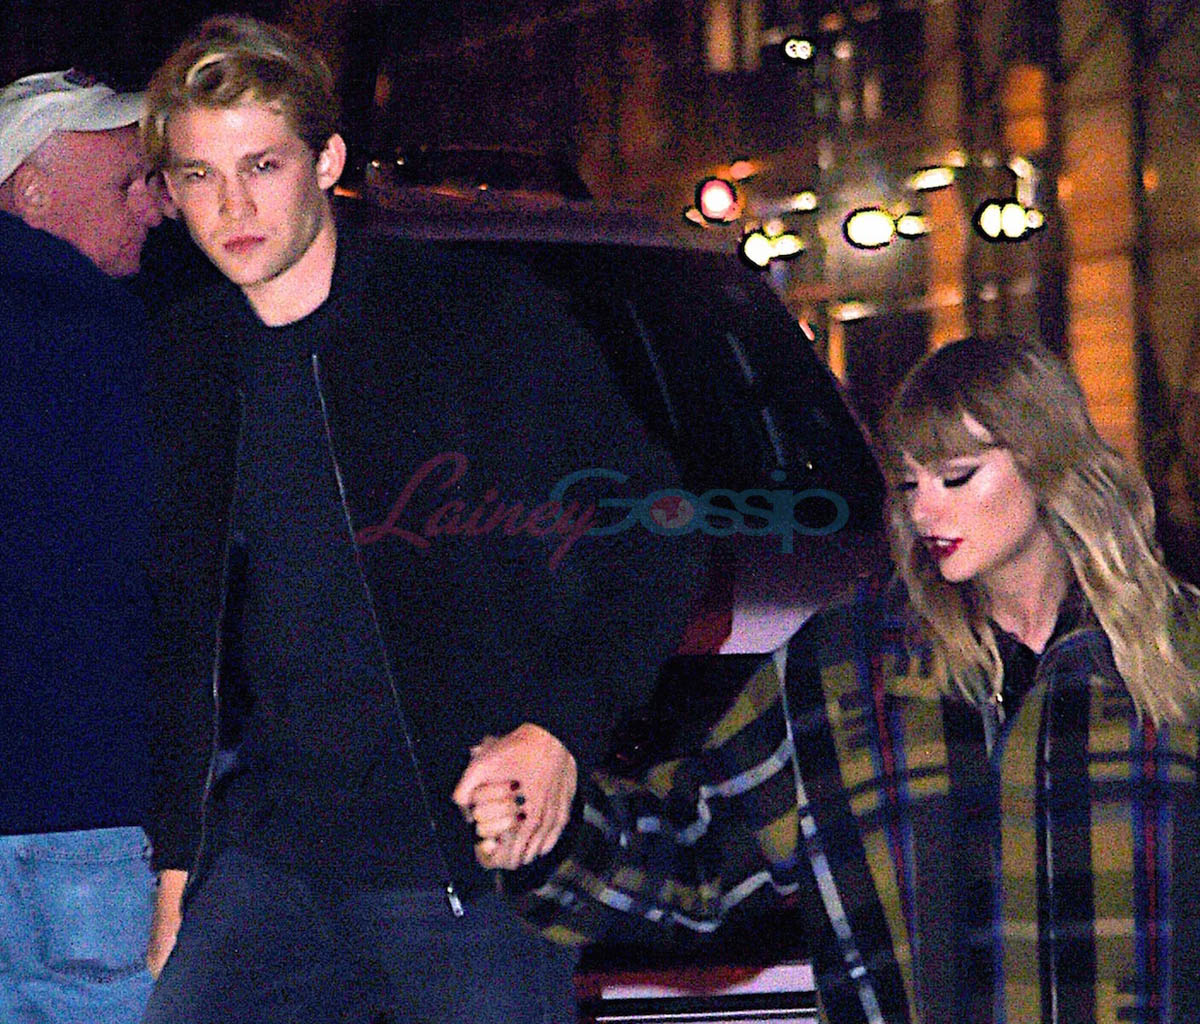 Joe Alwyn watches Taylor Swift perform and is photographed holding hands1200 x 1024